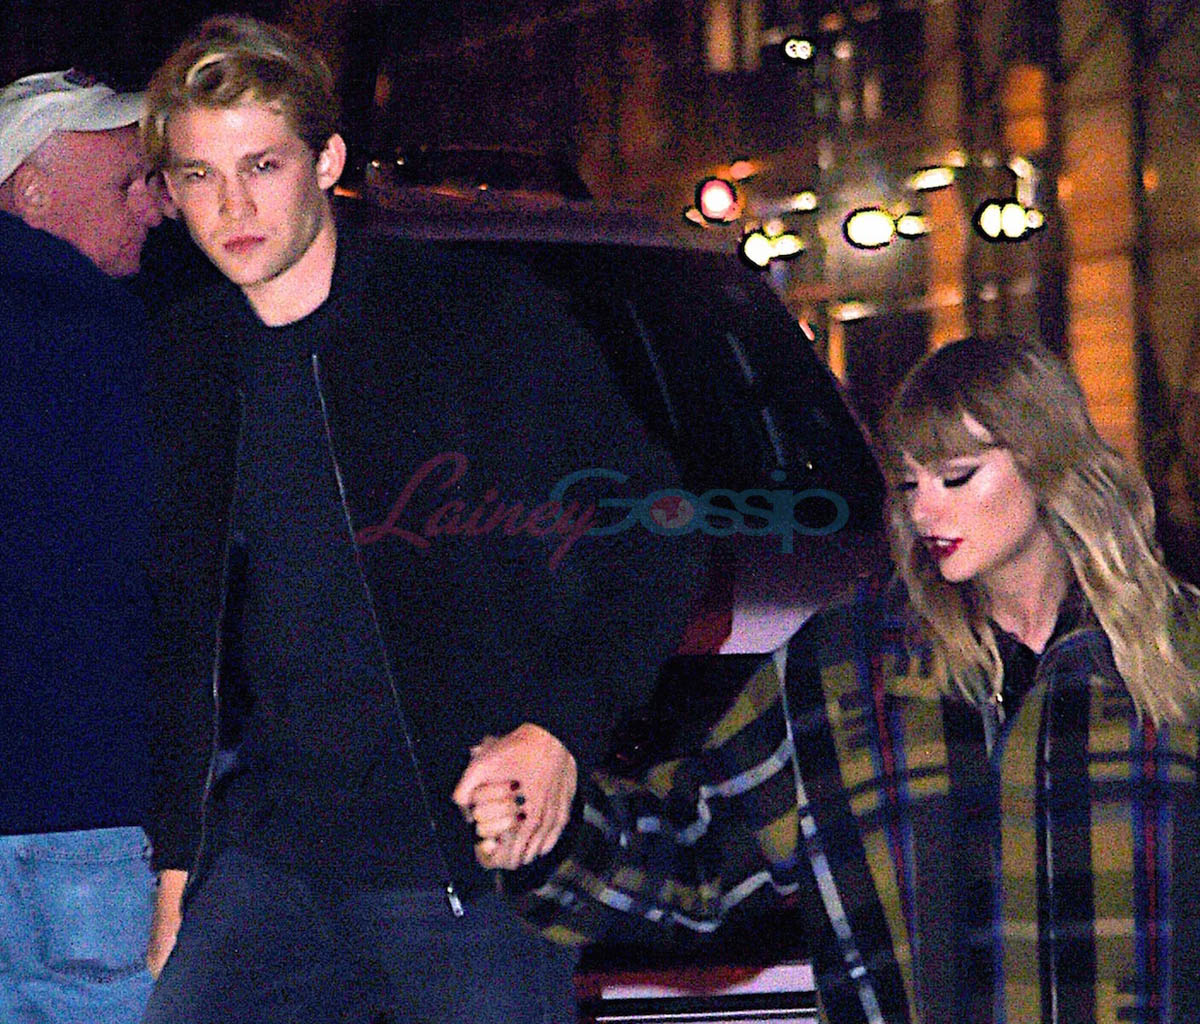 Joe Alwyn watches Taylor Swift perform and is photographed holding hands1200 x 1024